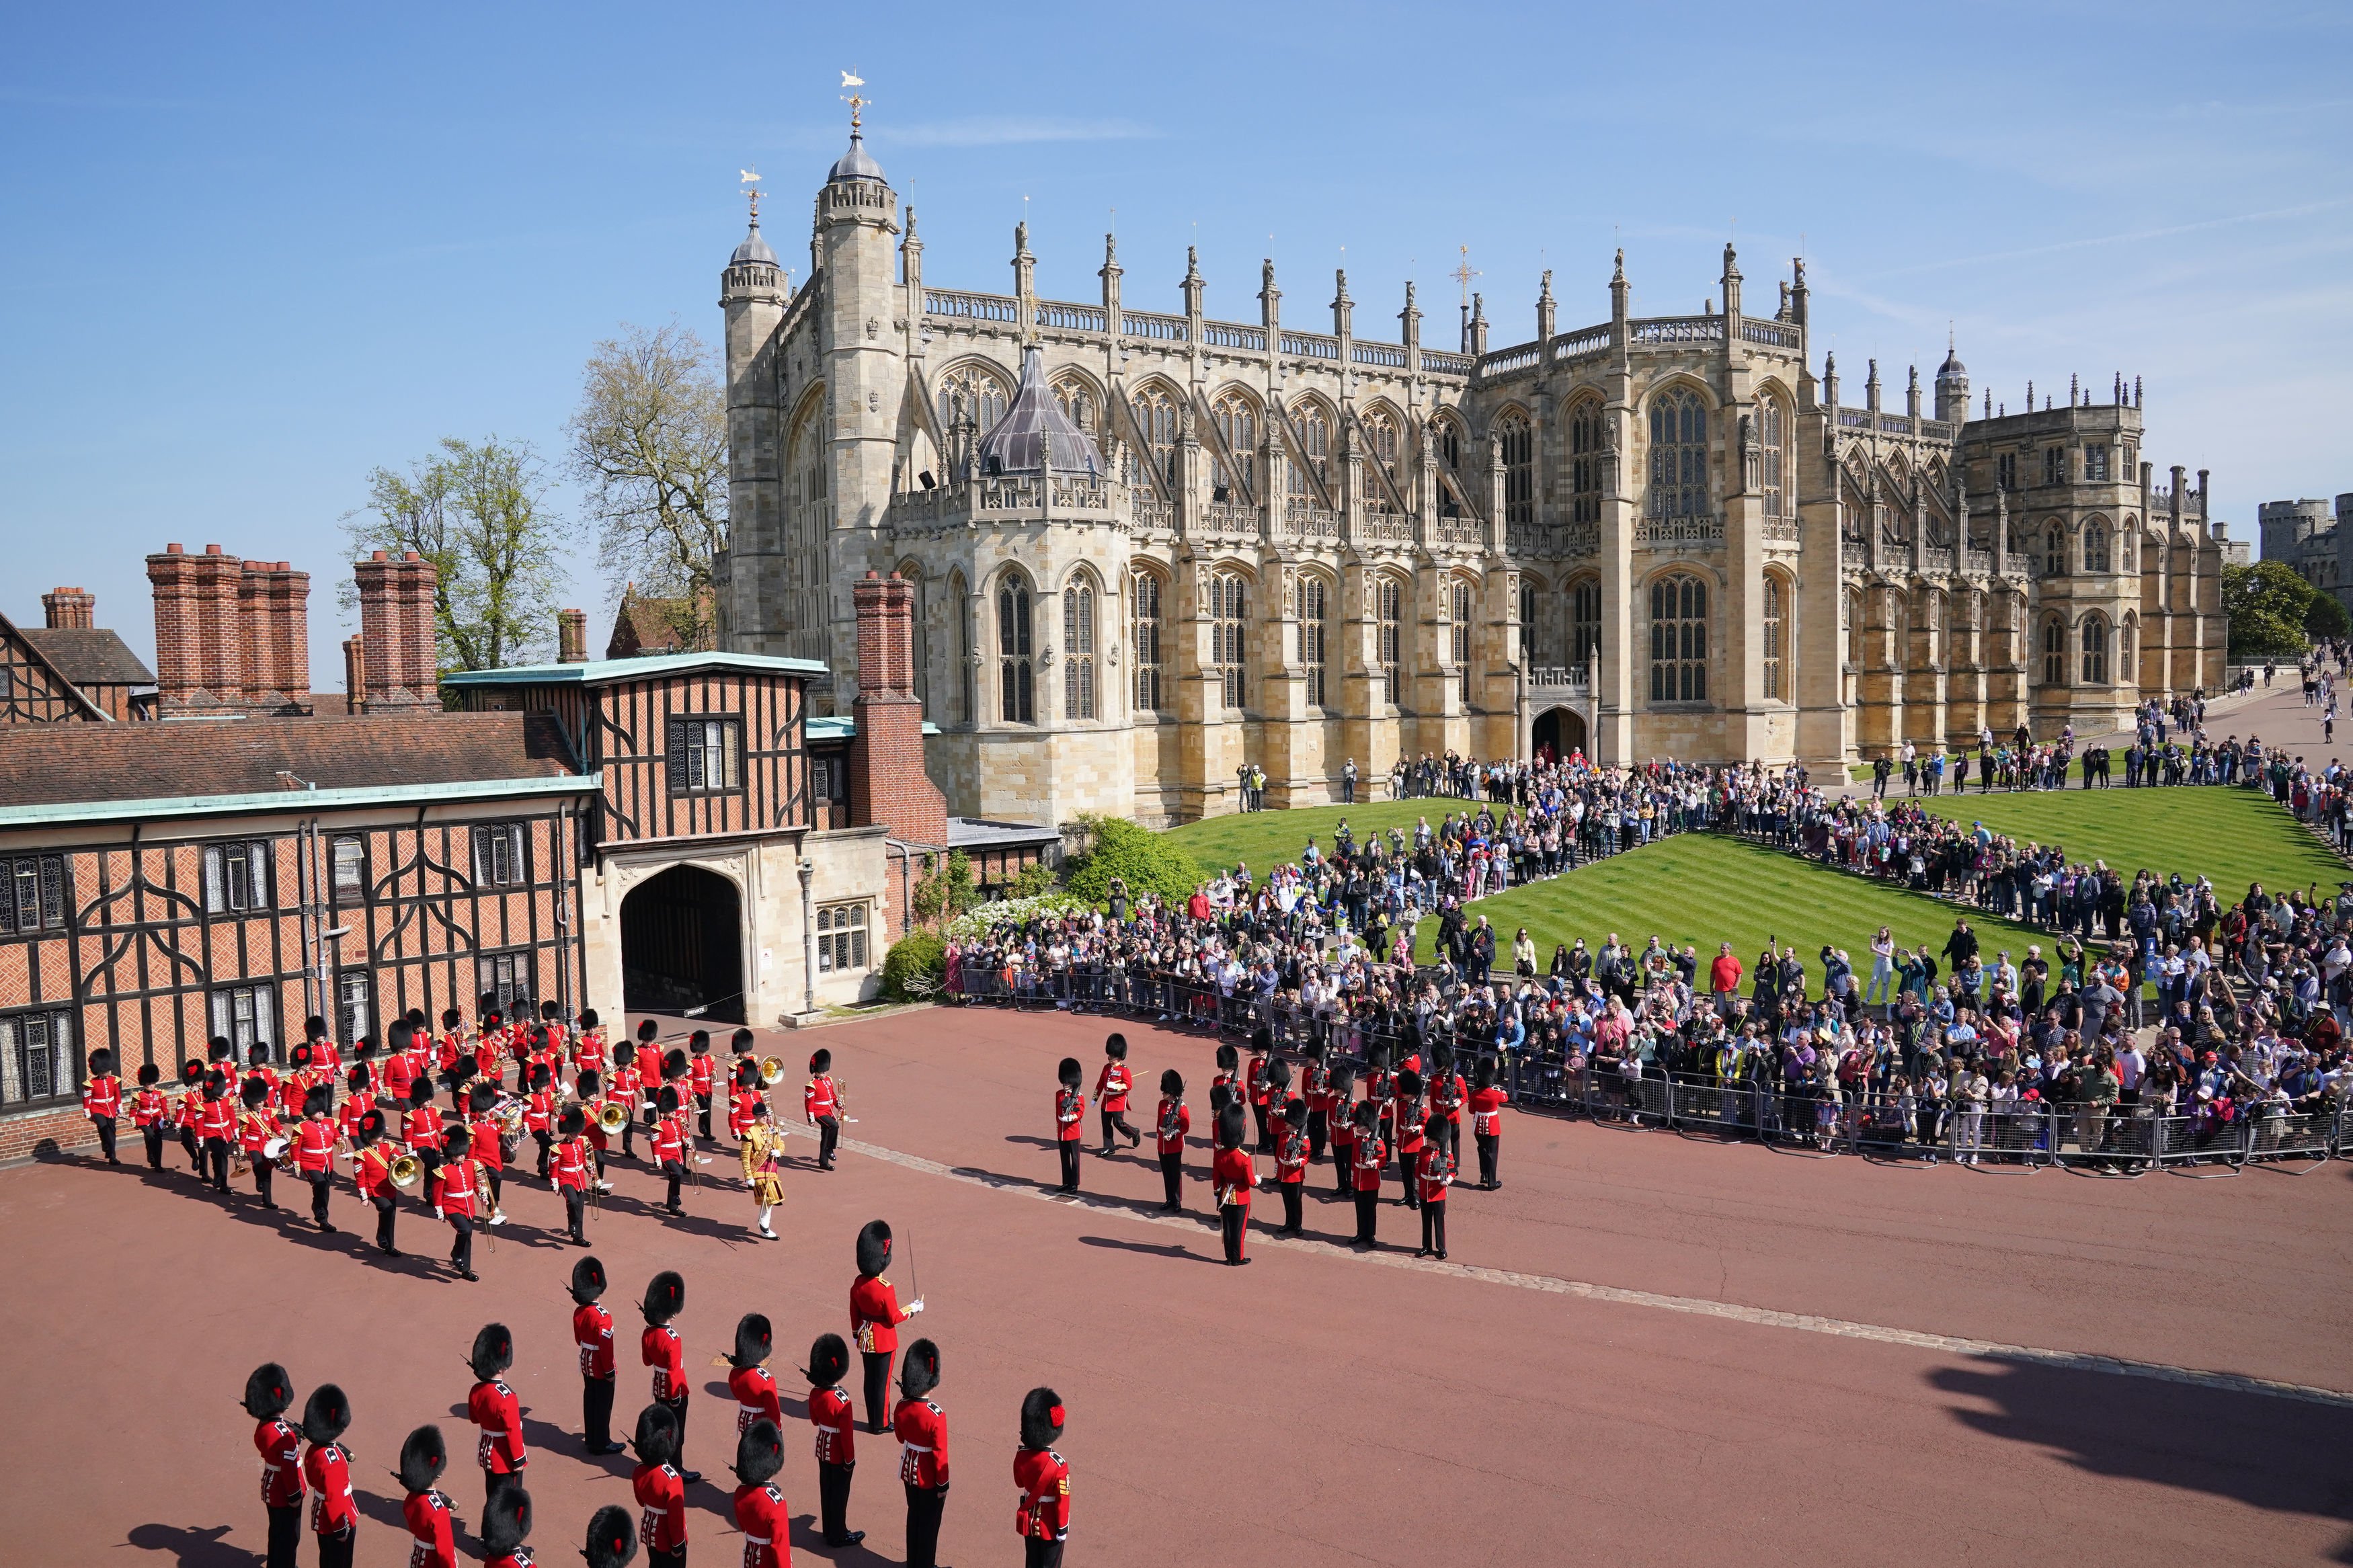 The Band of the Coldstream Guards (top left), play Happy Birthday to mark the 96th birthday of Queen Elizabeth II, alongside the 1st Battalion of the Coldstream Guards, during Changing the Guard at Windsor Castle on April 21, 2022 in London, England. | Source: Getty Images